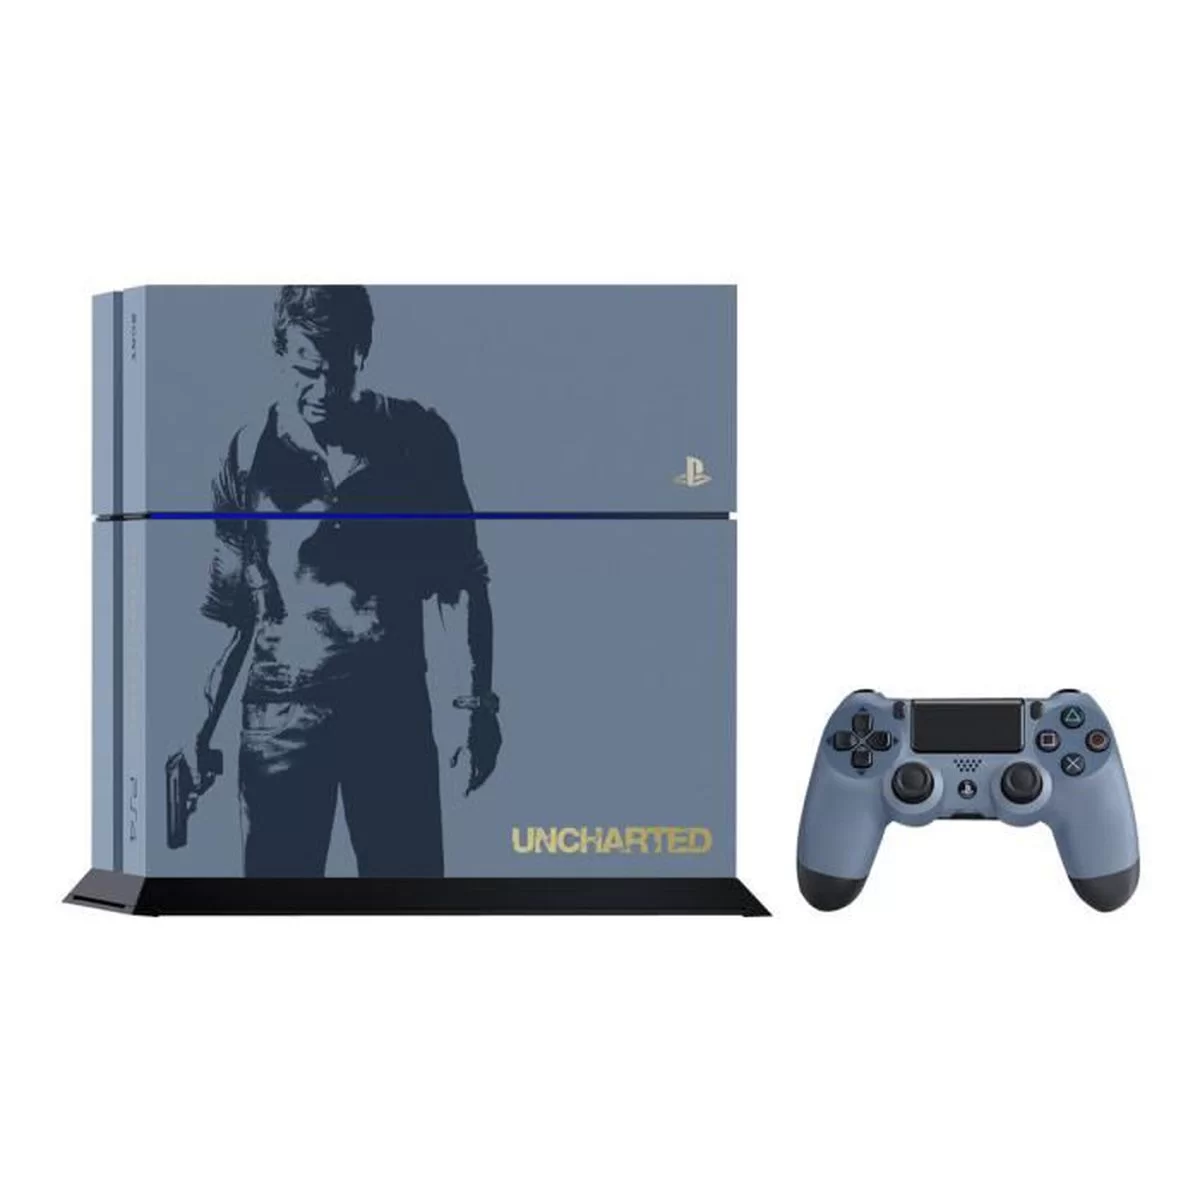 Ps4 читать. Ps4 Uncharted Edition. Ps4 Uncharted Limited Edition. Анчартед на плейстейшен 4. Ps4 Uncharted 4 Limited.